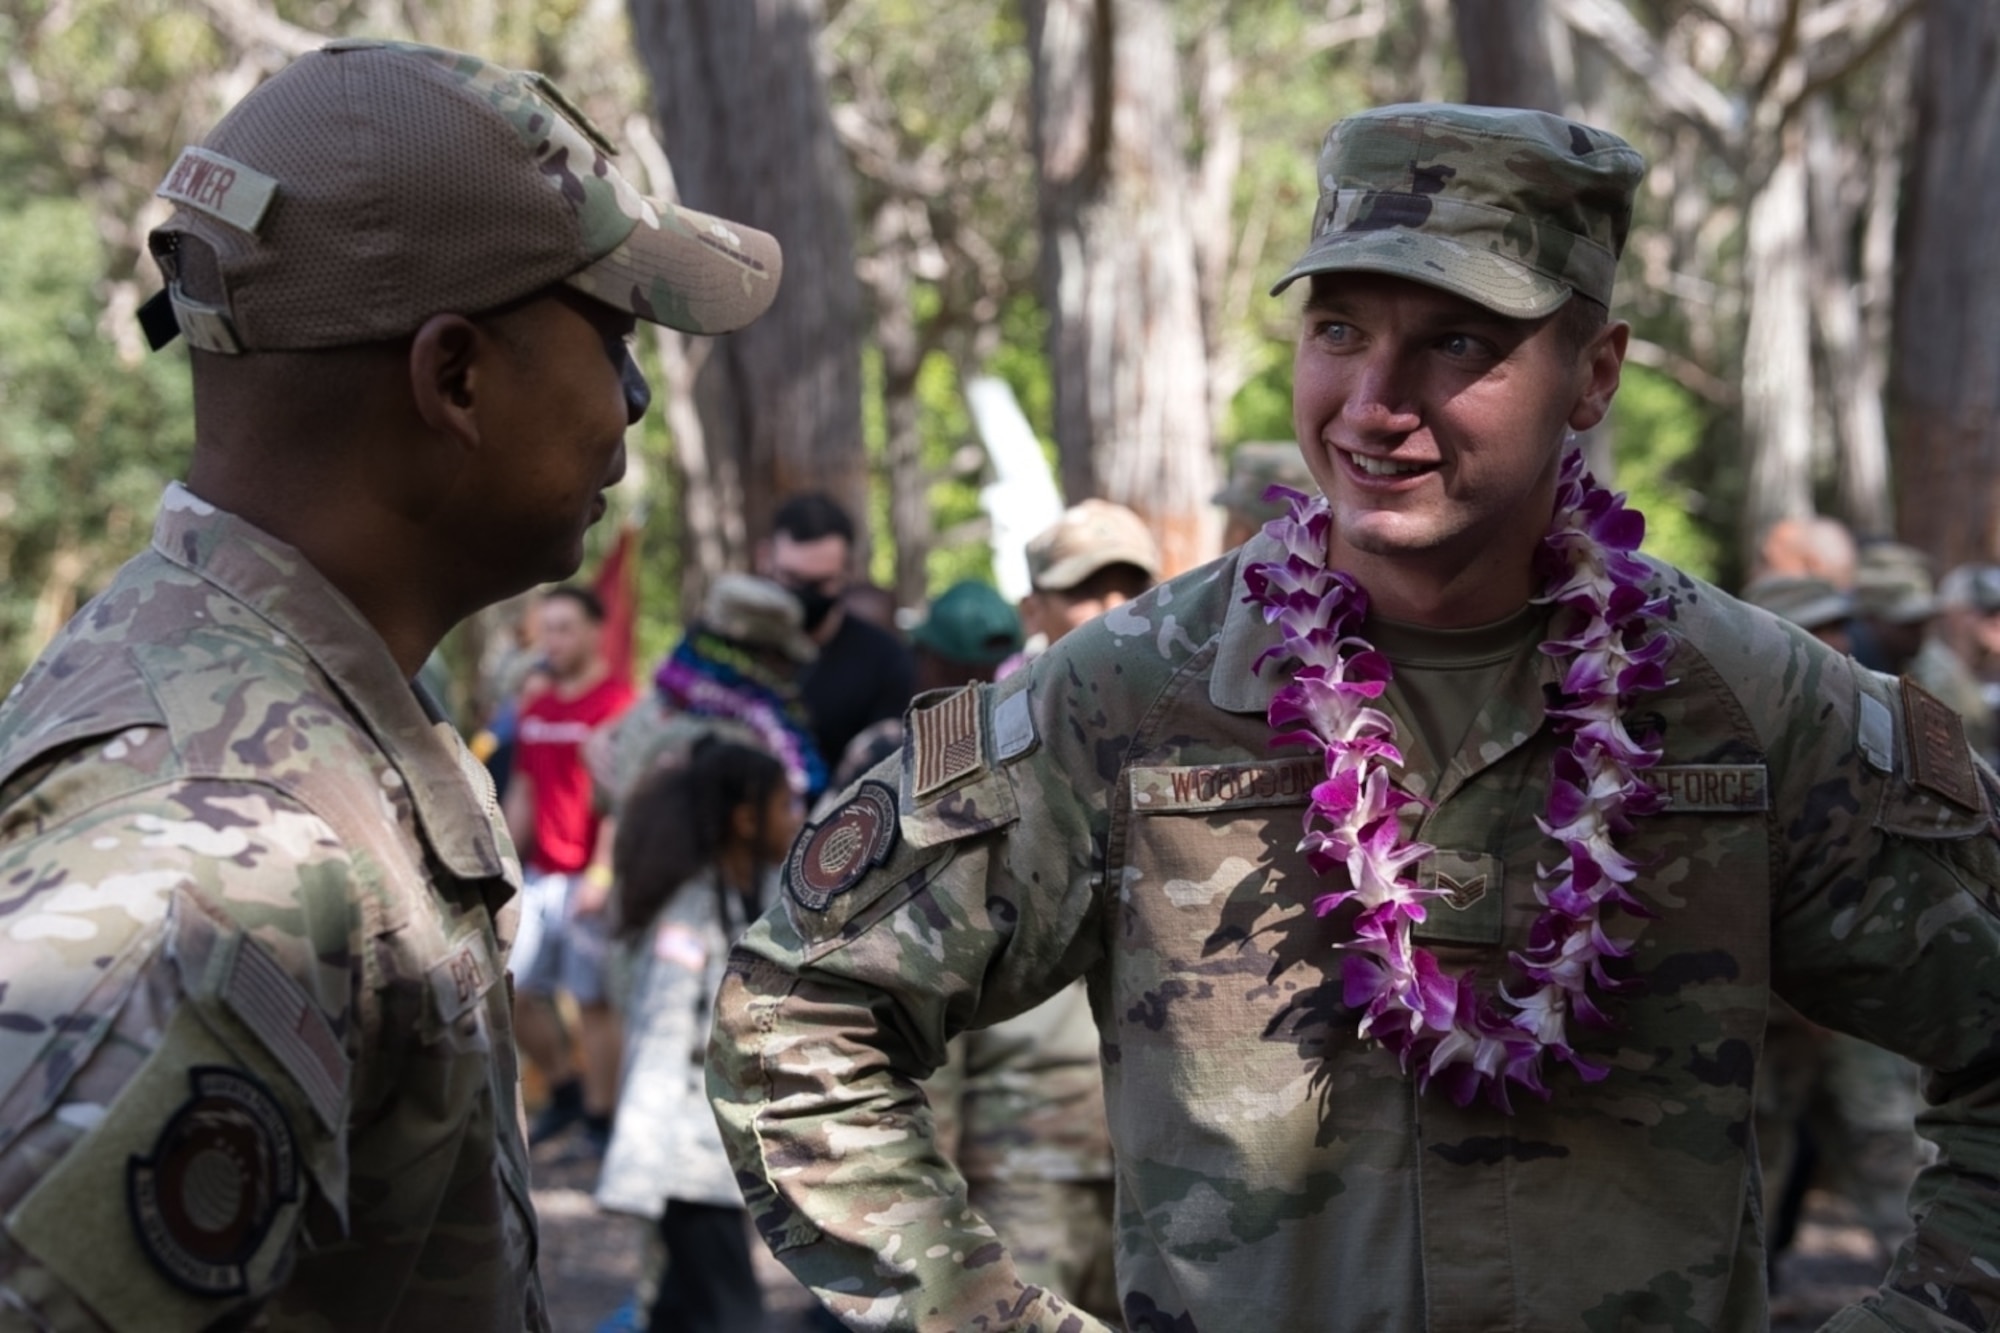 Lt. Col. Michael Brewer, 747th Cyberspace Squadron commander, congratulates Senior Airman Caden Woodson, 747th CS front-end software developer, on earning the Air Assault Badge after graduating Army Air Assault School at Lightning Academy, Hawaii, April 15, 2022.  During this 10-day course, students are trained for insertions, evacuation and pathfinder missions, focusing on mastering rappelling techniques from rotary-wing aircraft.  (Courtesy Photo)